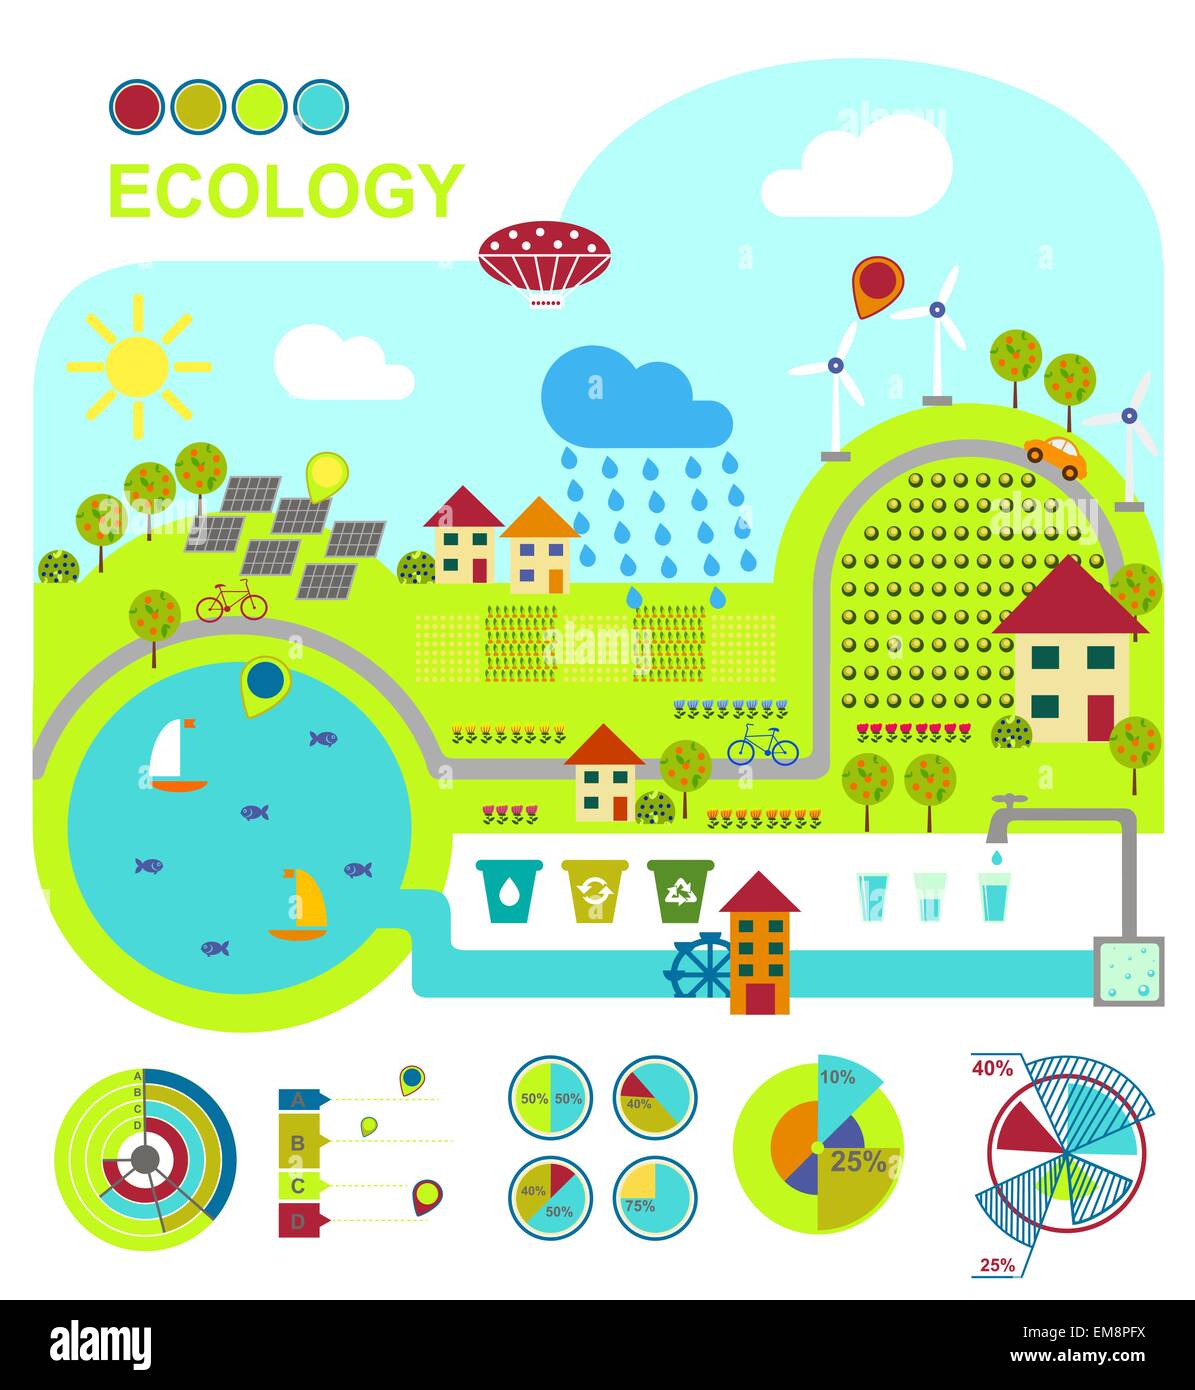 Vector illustration of ecologically friendly production methods Stock Vector